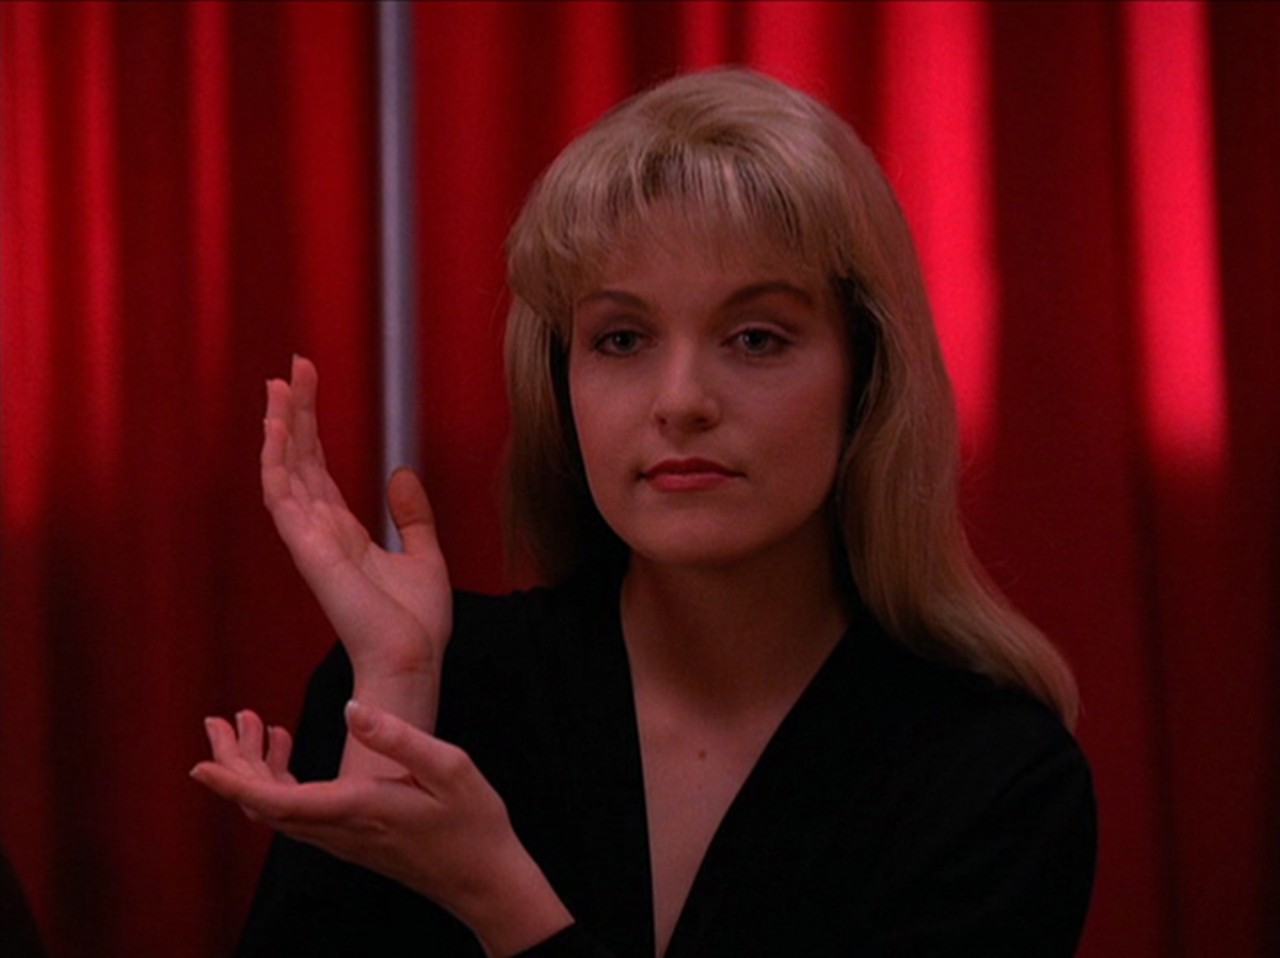 Saturday, May 27Body//Talk: The Twin Peaks Party at Will's Pub